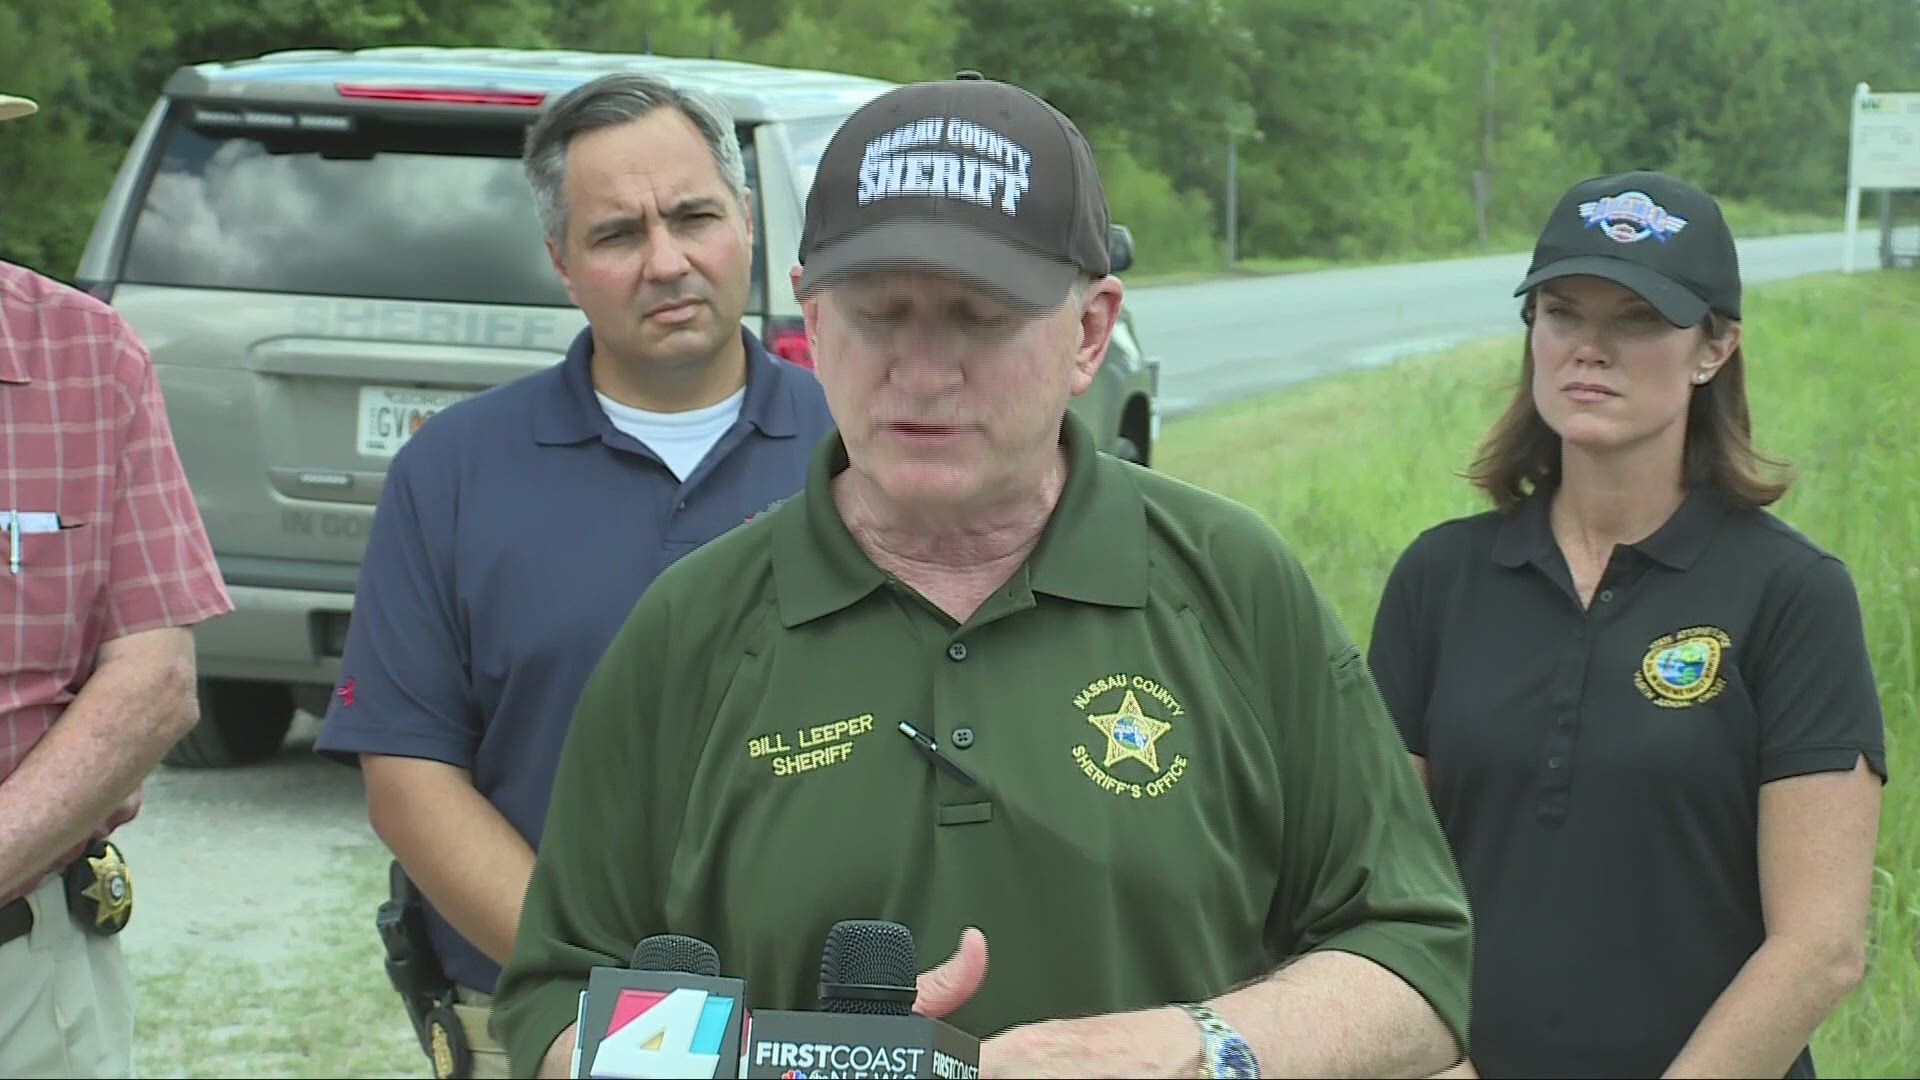 The FBI said the search for evidence in the case at the Chesser Island was going on schedule but did not indicate if anything of note had been found at this time.